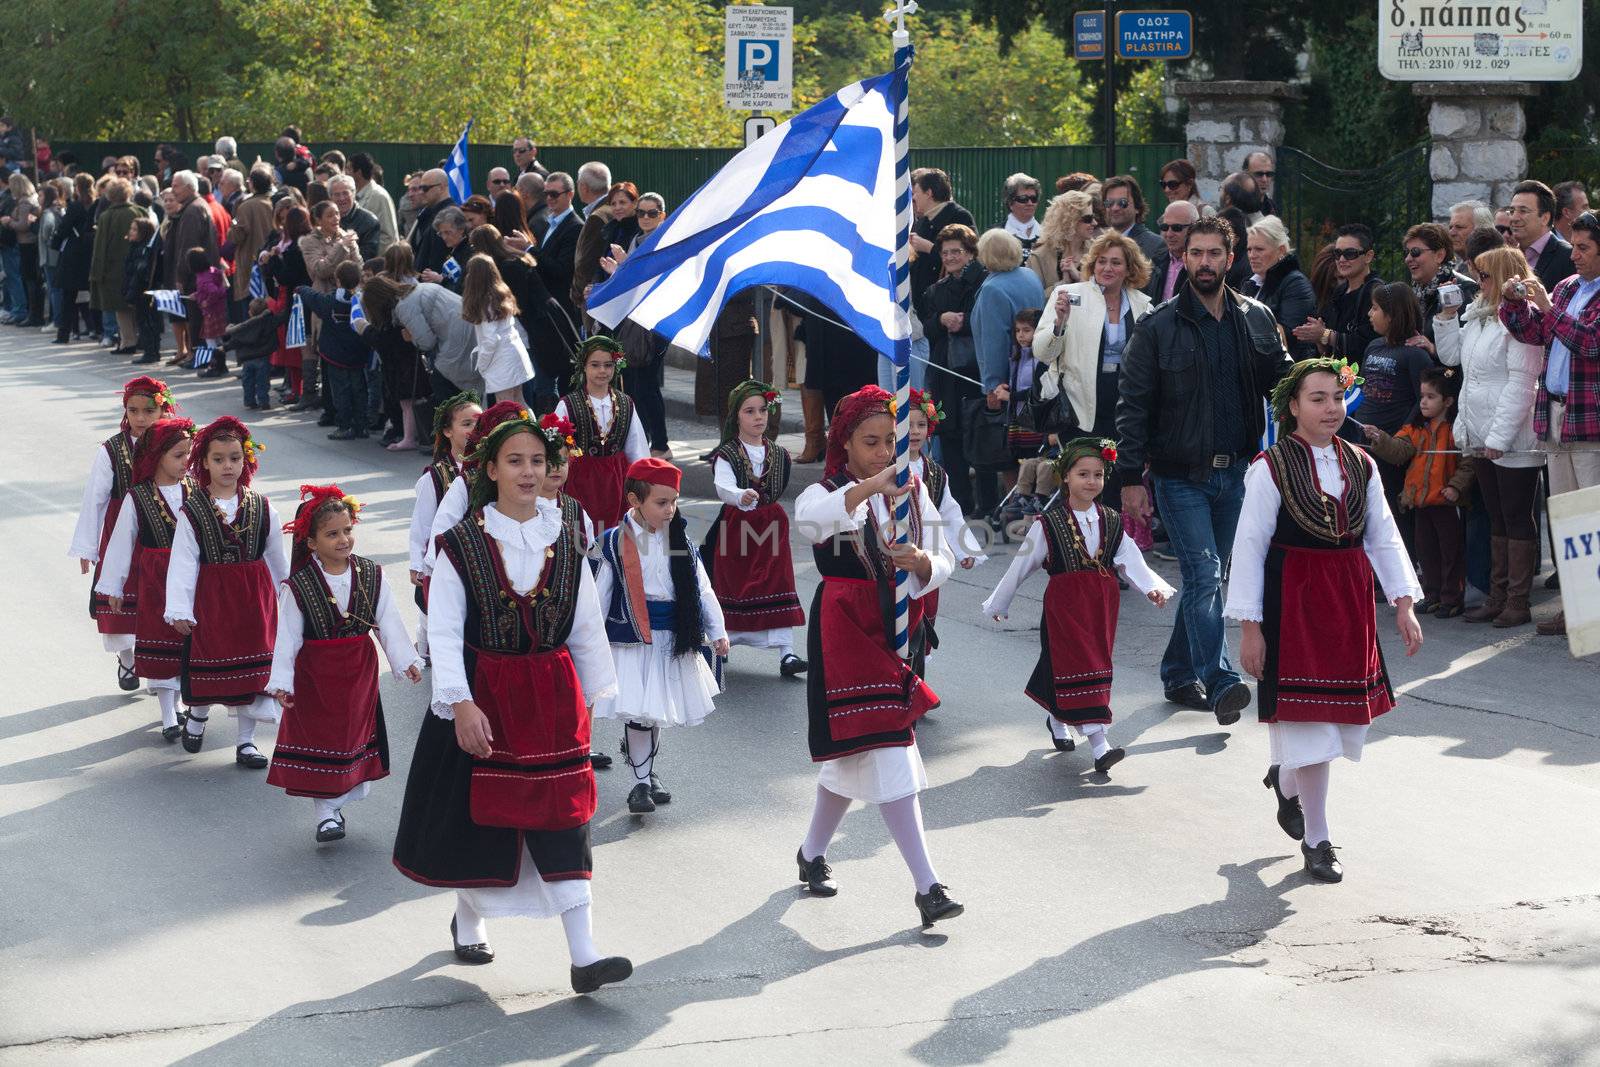 THESSALONIKI, GREECE - OCTOBER 28: Parade to celebrate the anniversary of 1940 which was the military conflict between Greece and Italy.Children holding Greek flags on October 28, 2011 in Thessaloniki